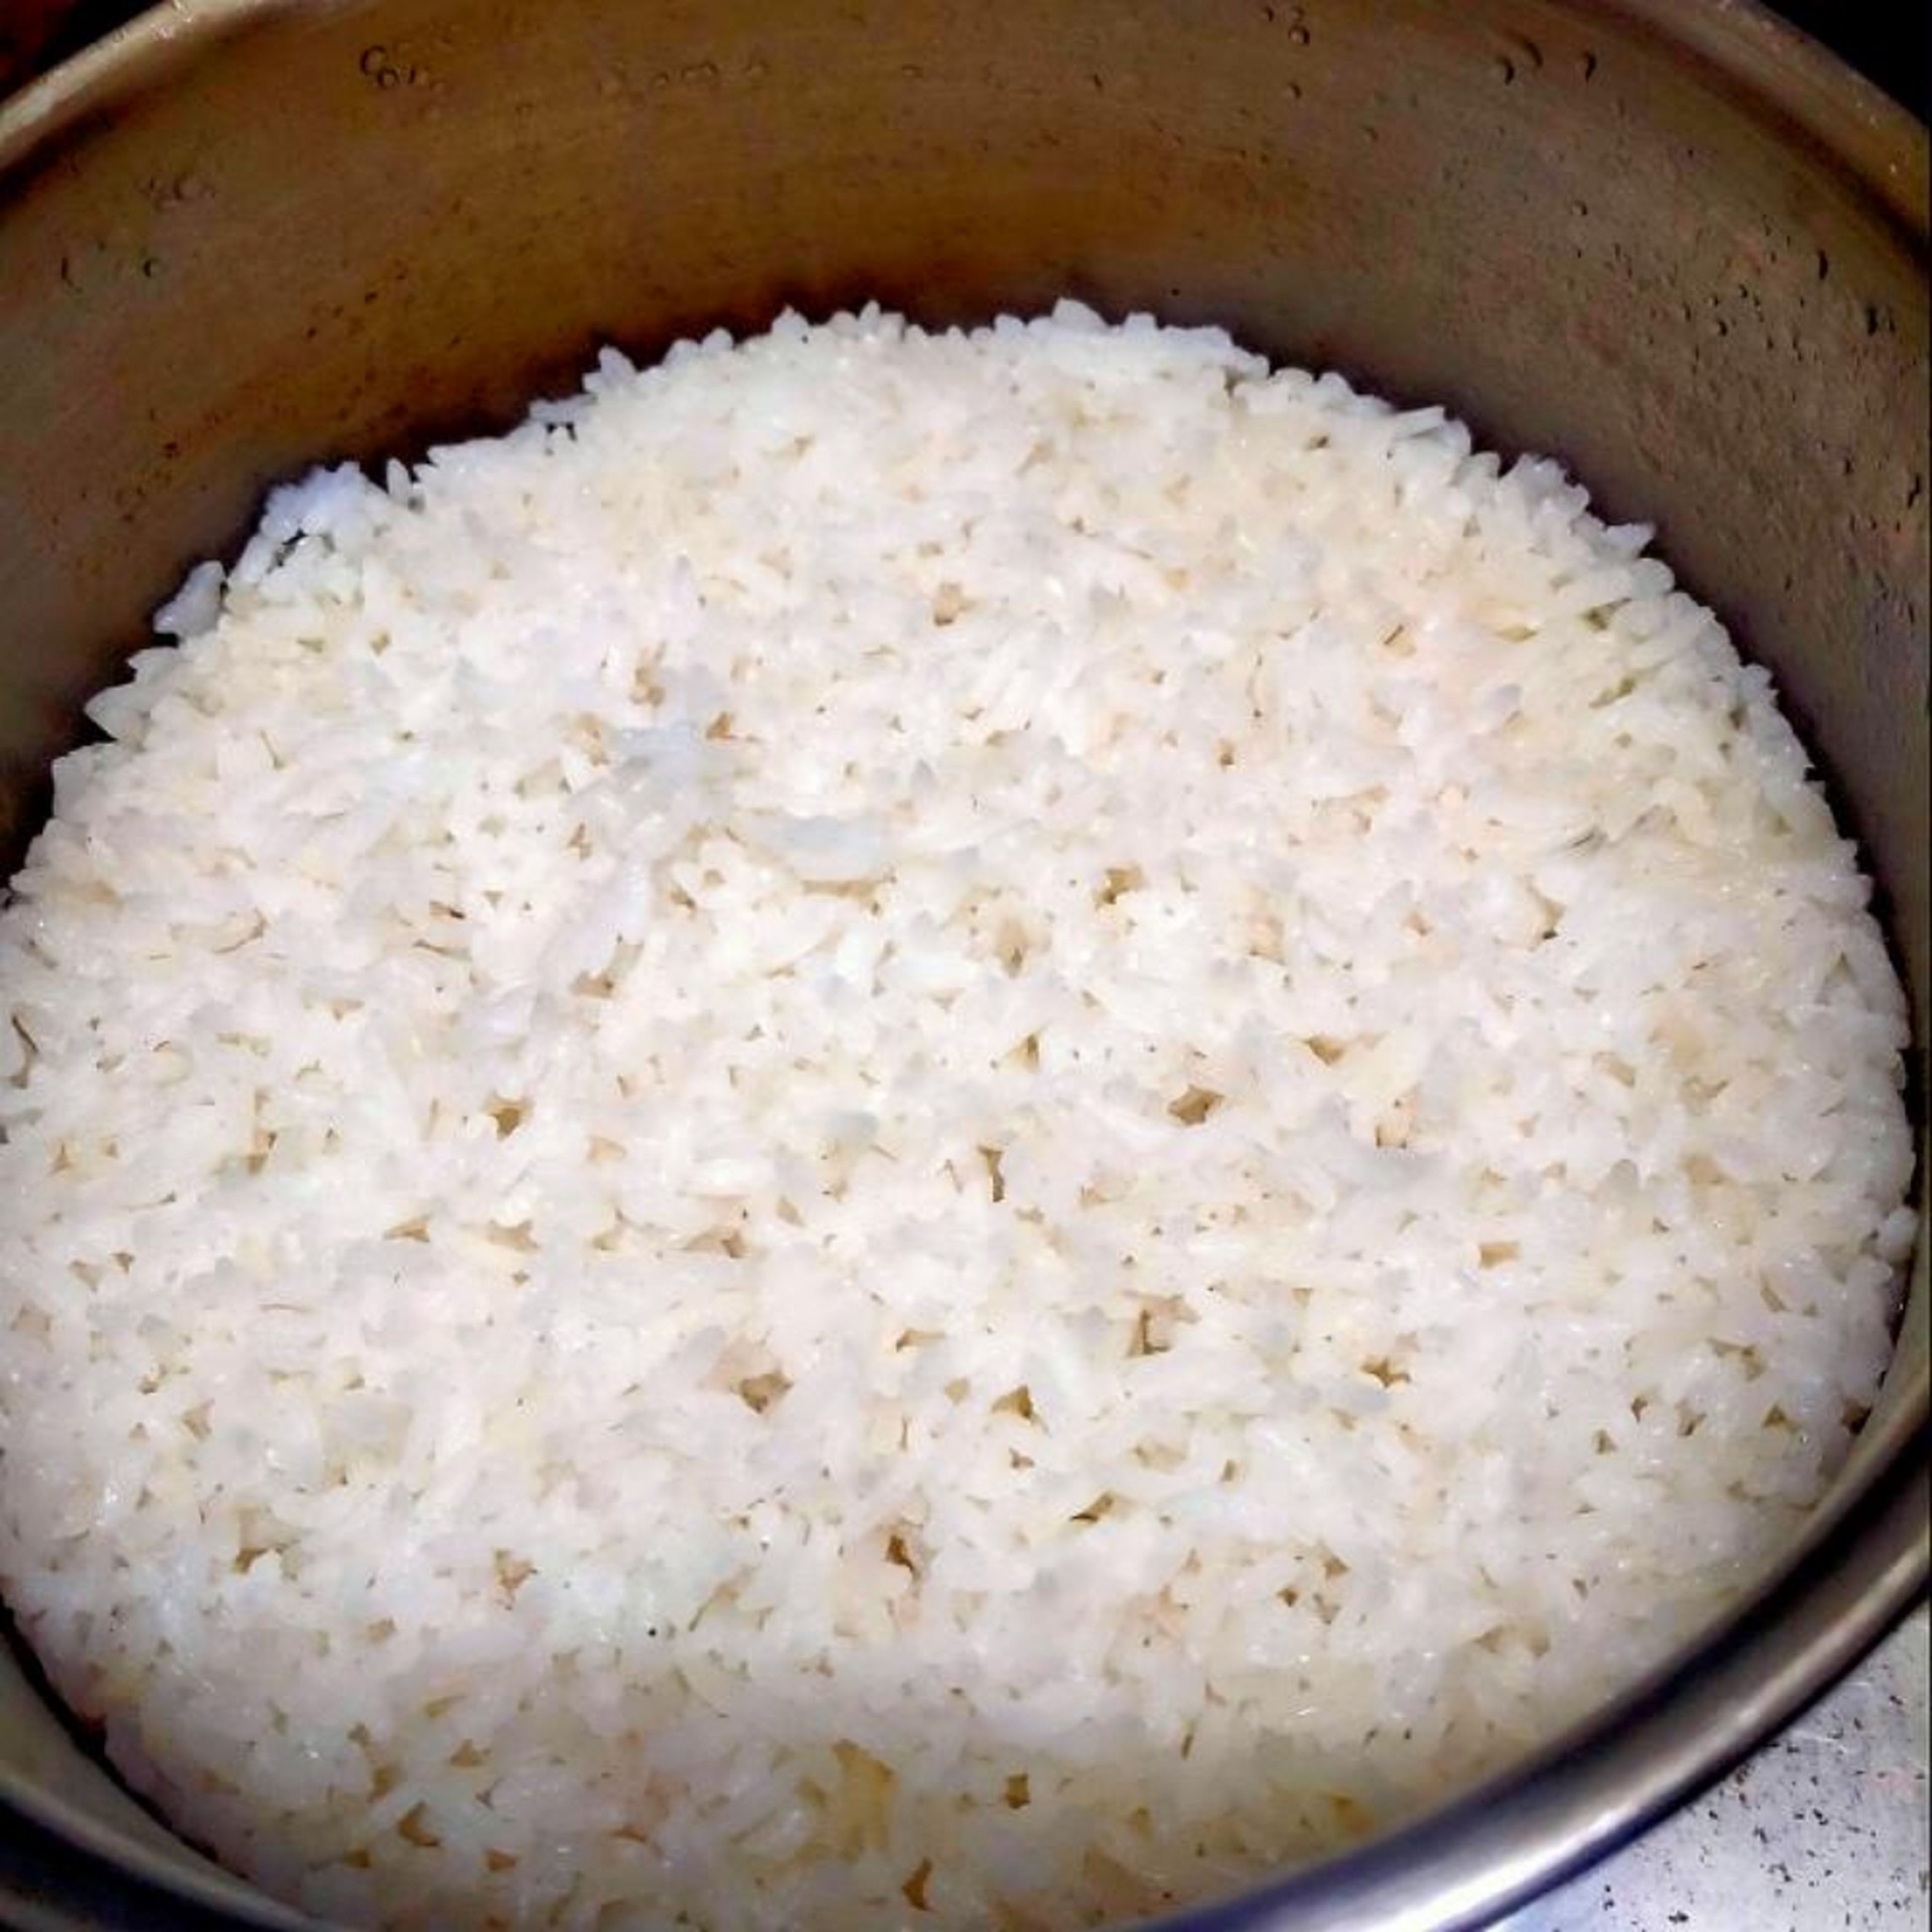 first cook the rice(Egyptian rice) in the rice cooker or boil/steam it or stir the rice with one tbsp vegetable oil on medium heat for 2 minutes then add 1 1/2 cup water bring it to boil for 1 minute then cover it and reduce to low heat for 15 - 20 minutes and let it cool for 20 - 30 minutes